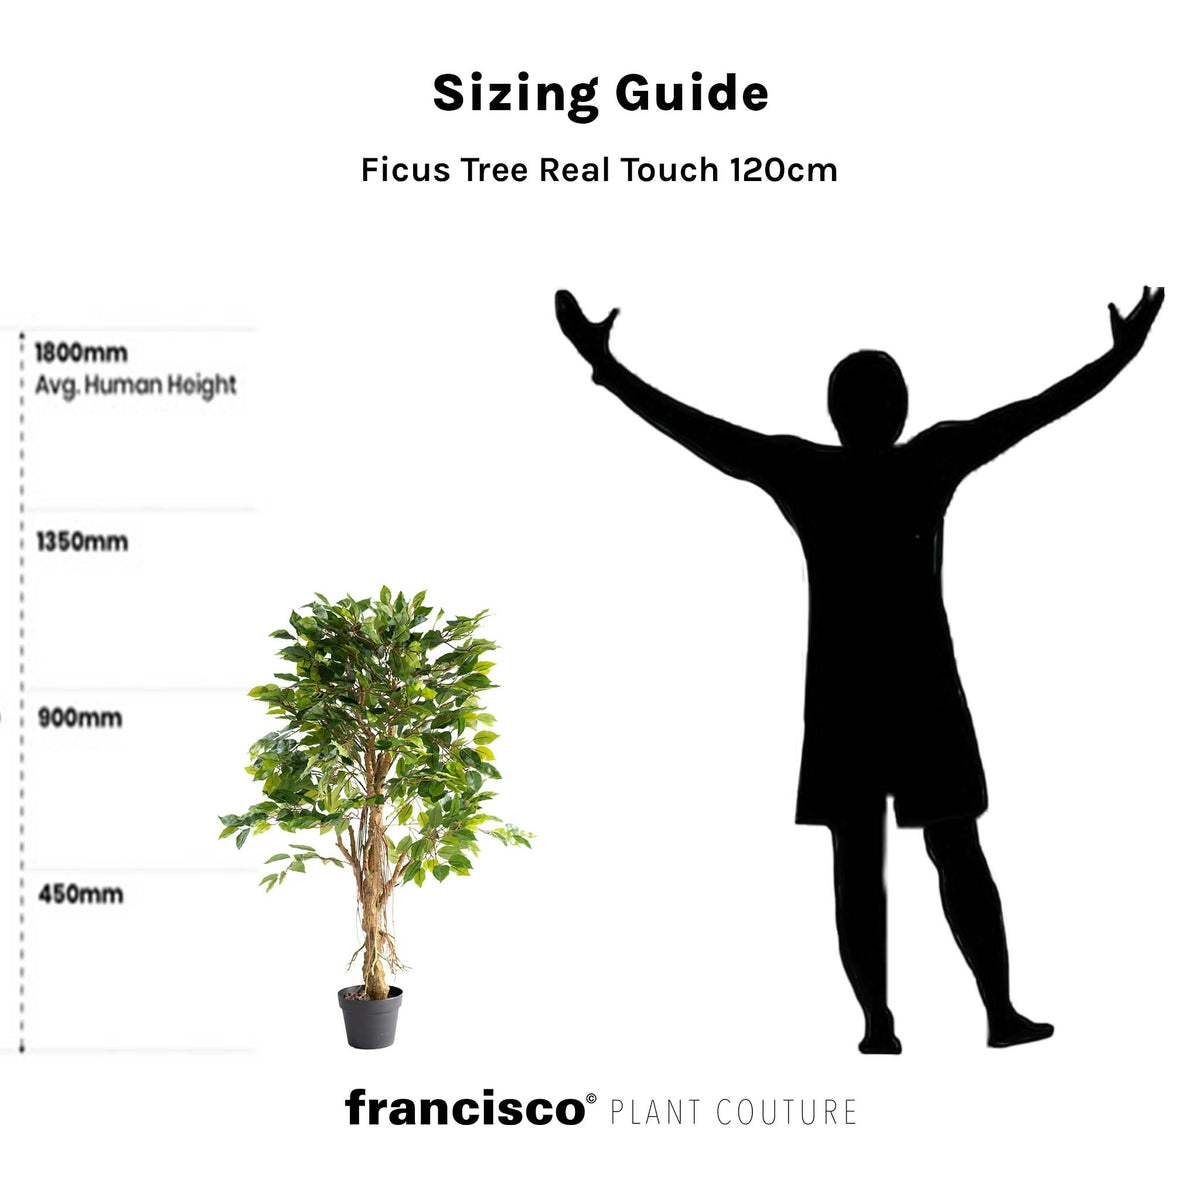 Ficus Tree Real Touch 120cm